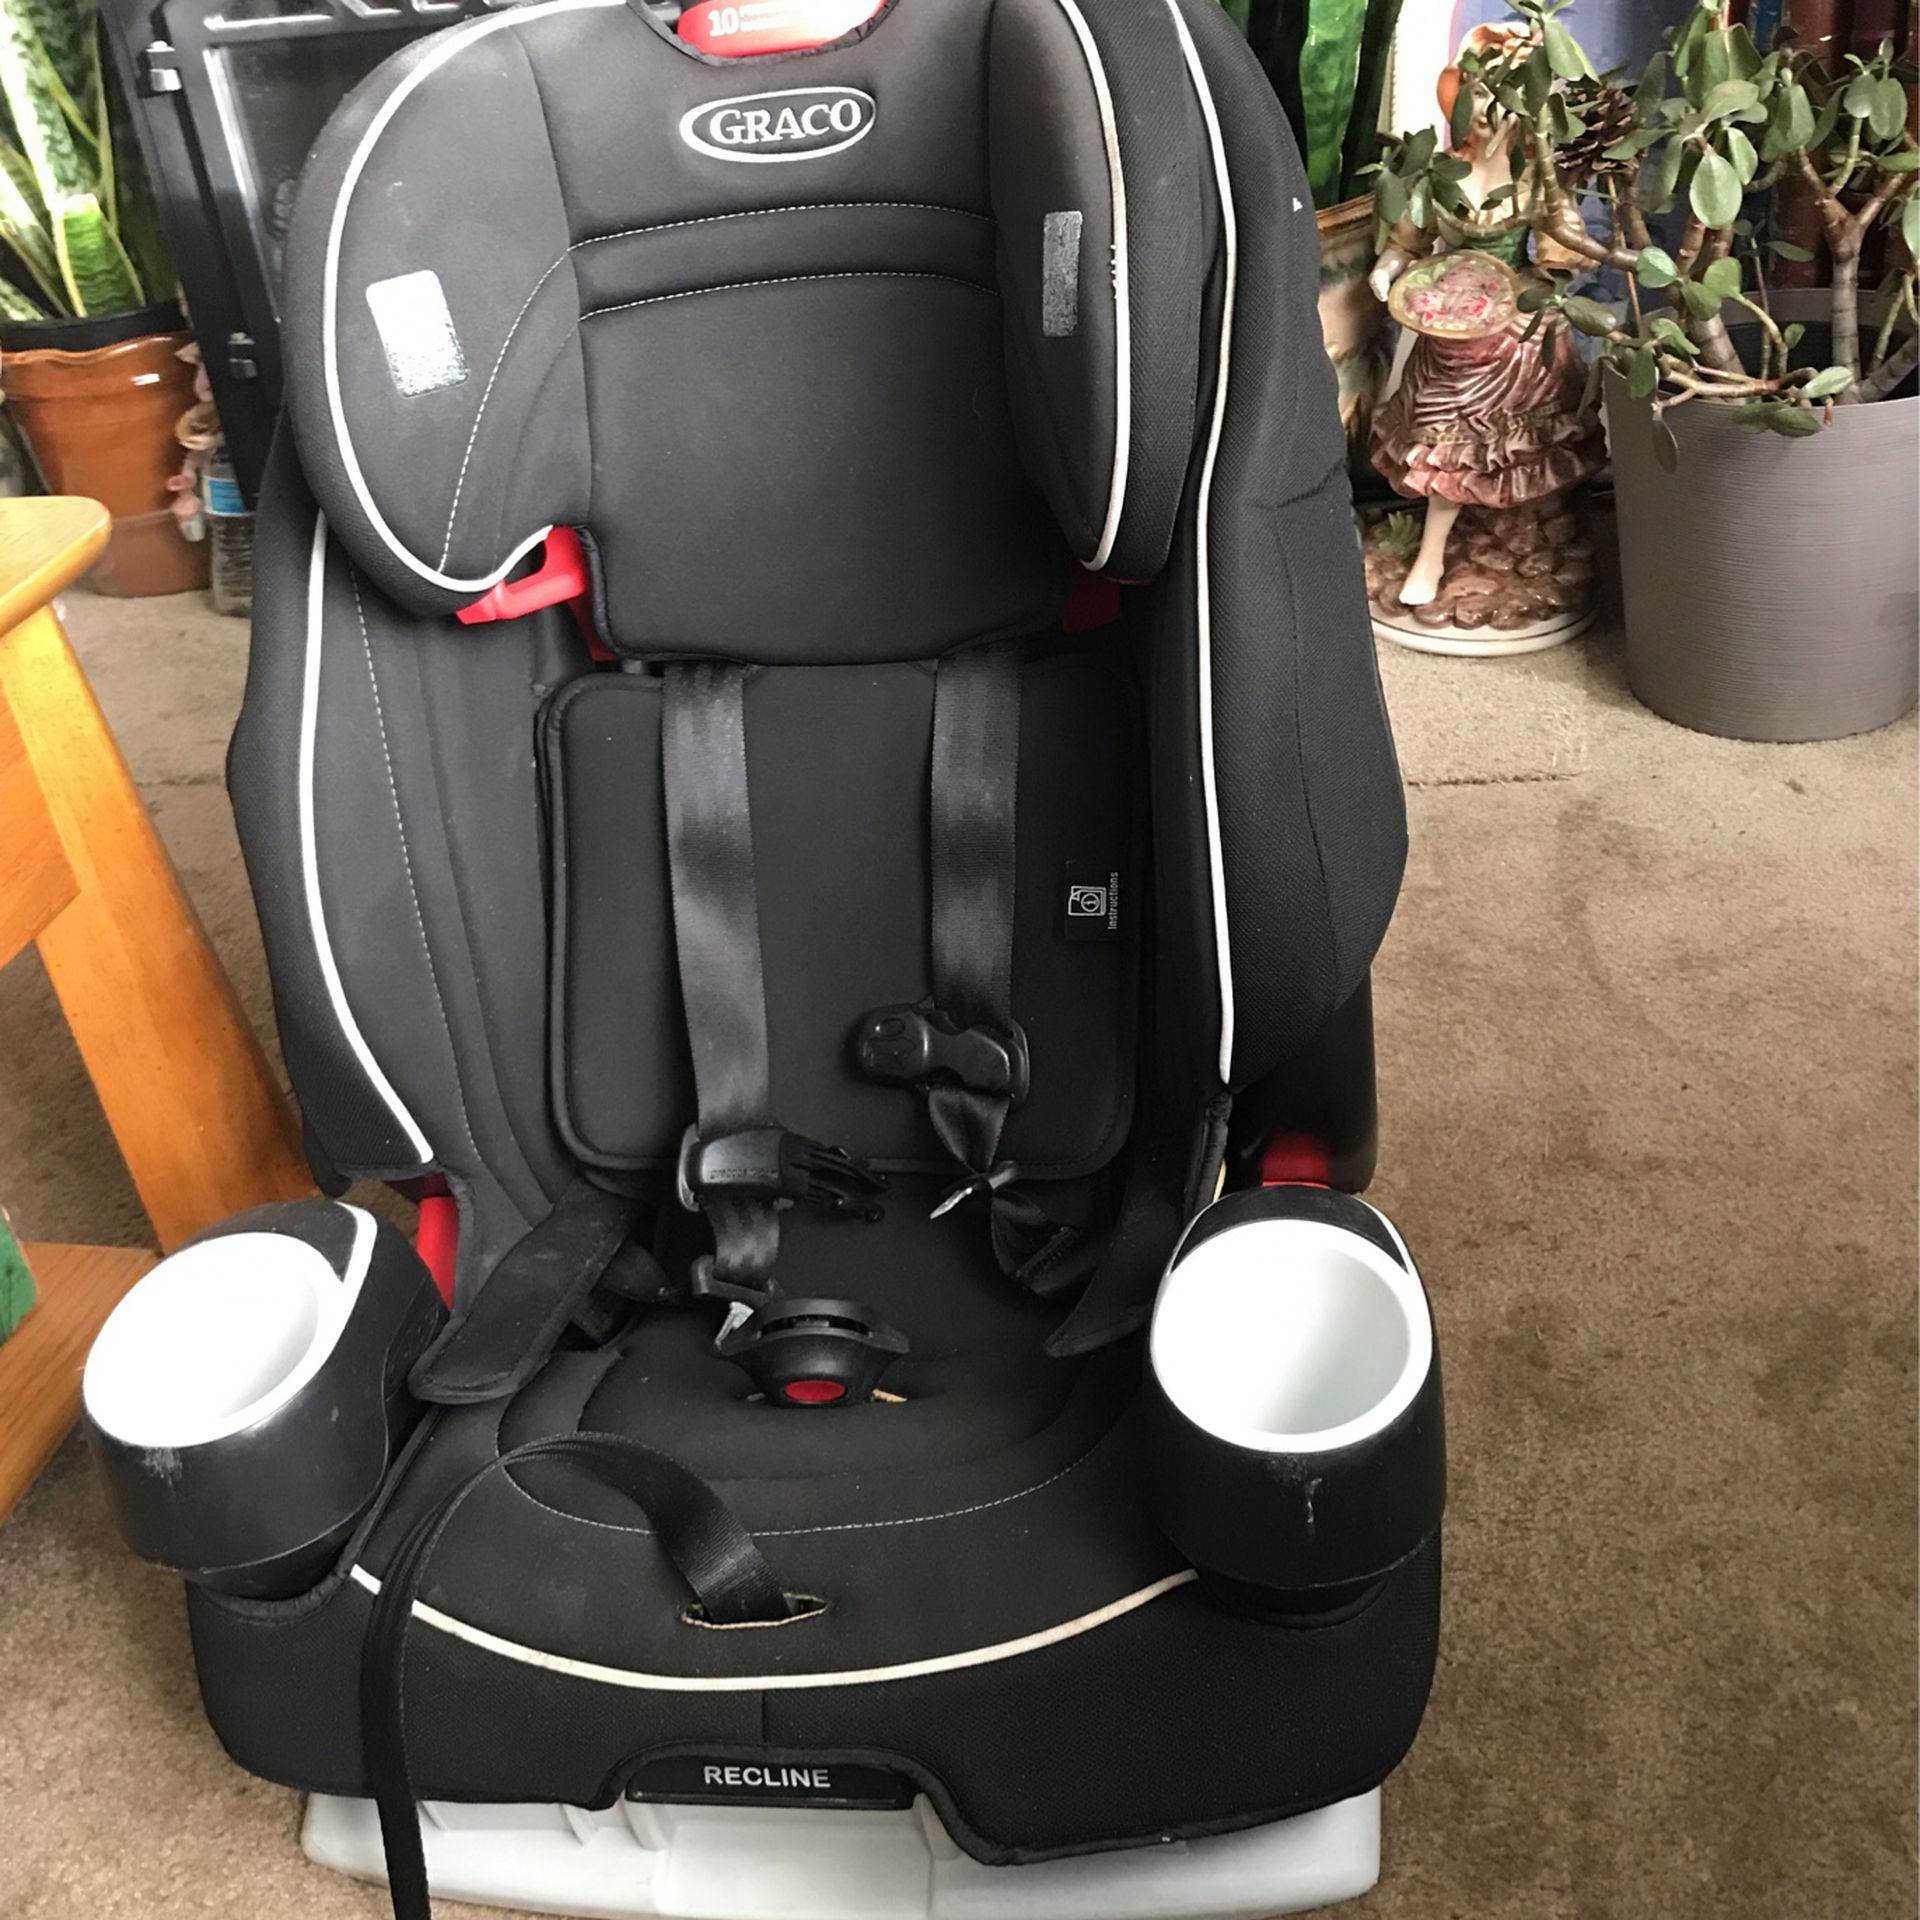 Toddler Graco Car Seat  Price 90$   Expire   2027  Pick    Up   E    72nd     Tacoma 